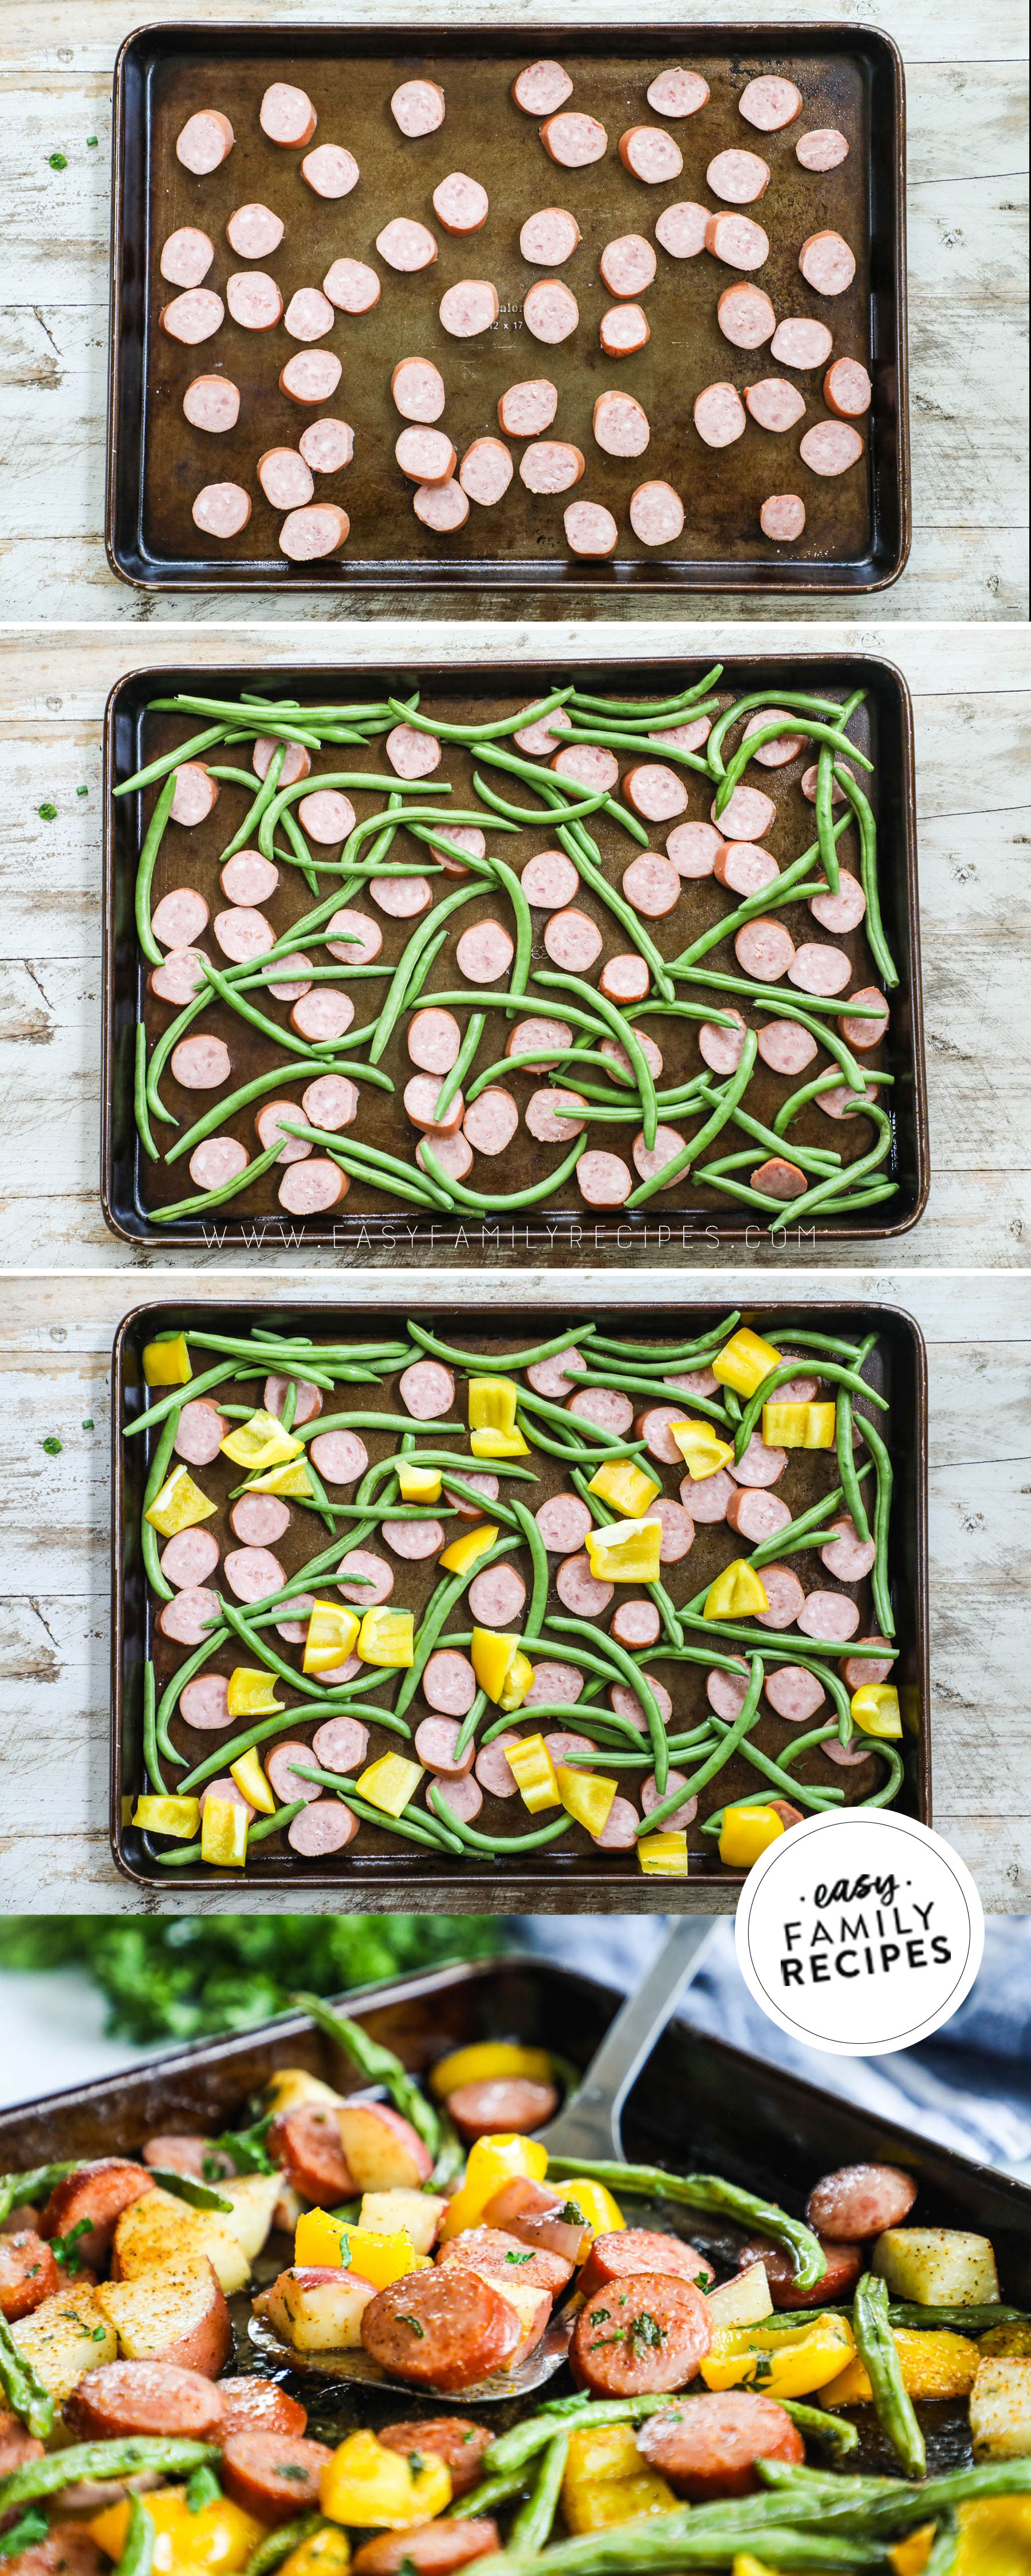 Steps to make cajun sheet pan sausage and veggies step 1. chop sausage and spread out on pan step2. add chopped green beans to pan step 3. add diced potatoes to pan and butter step4. bake and enjoy!